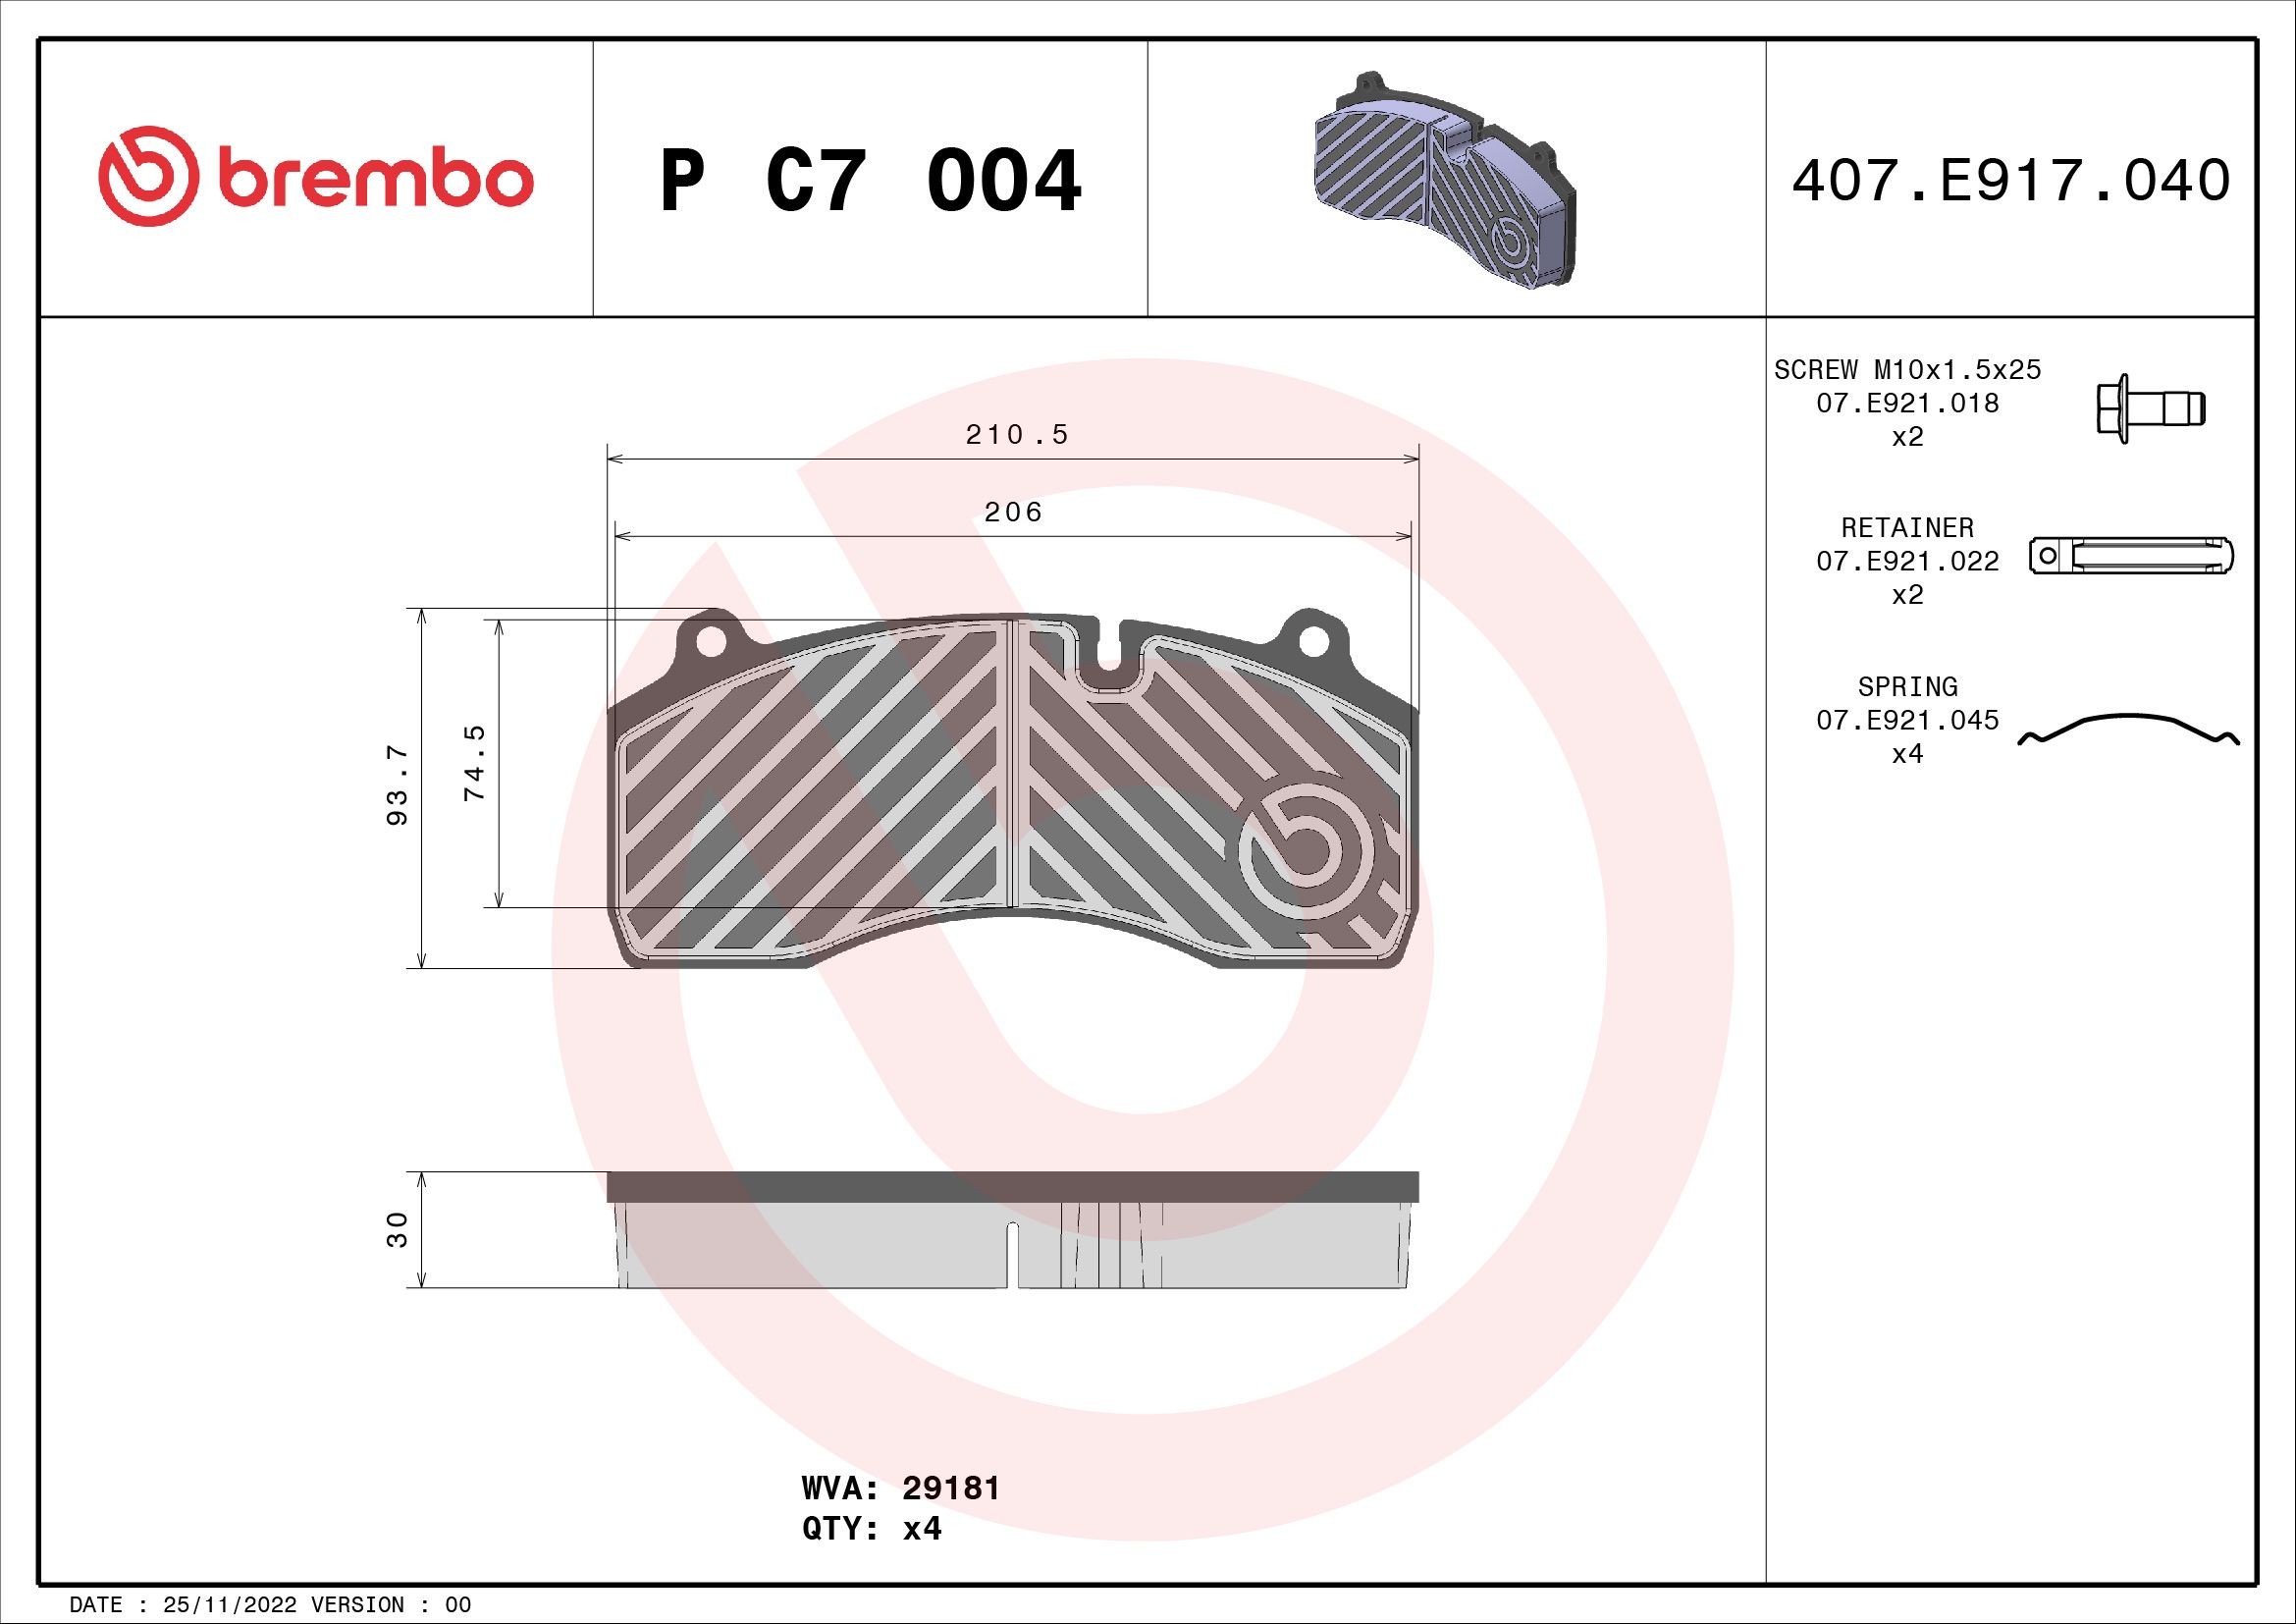 BREMBO prepared for wear indicator, with accessories Height: 94mm, Width: 211mm, Thickness: 30mm Brake pads P C7 004 buy